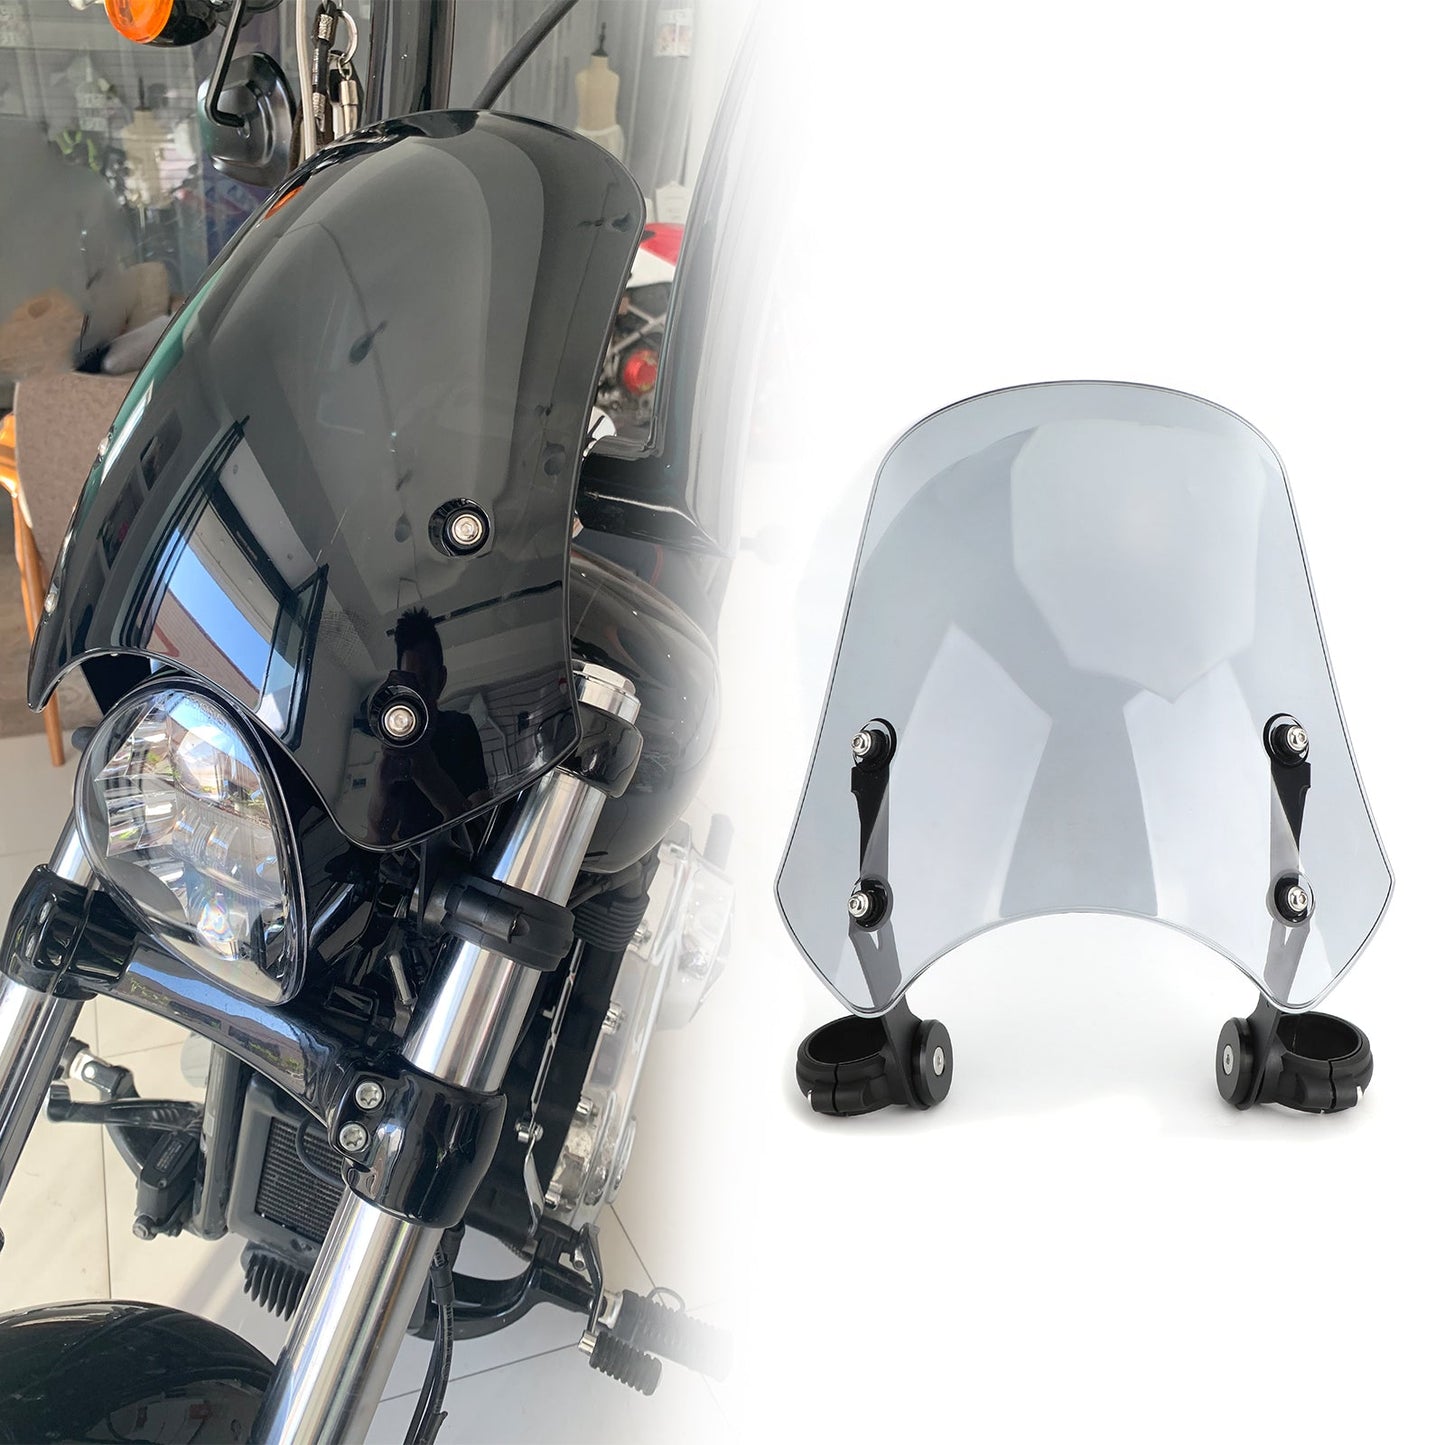 ABS Motorcycle Windscreen Windshield for Harley Dyna Softail Models